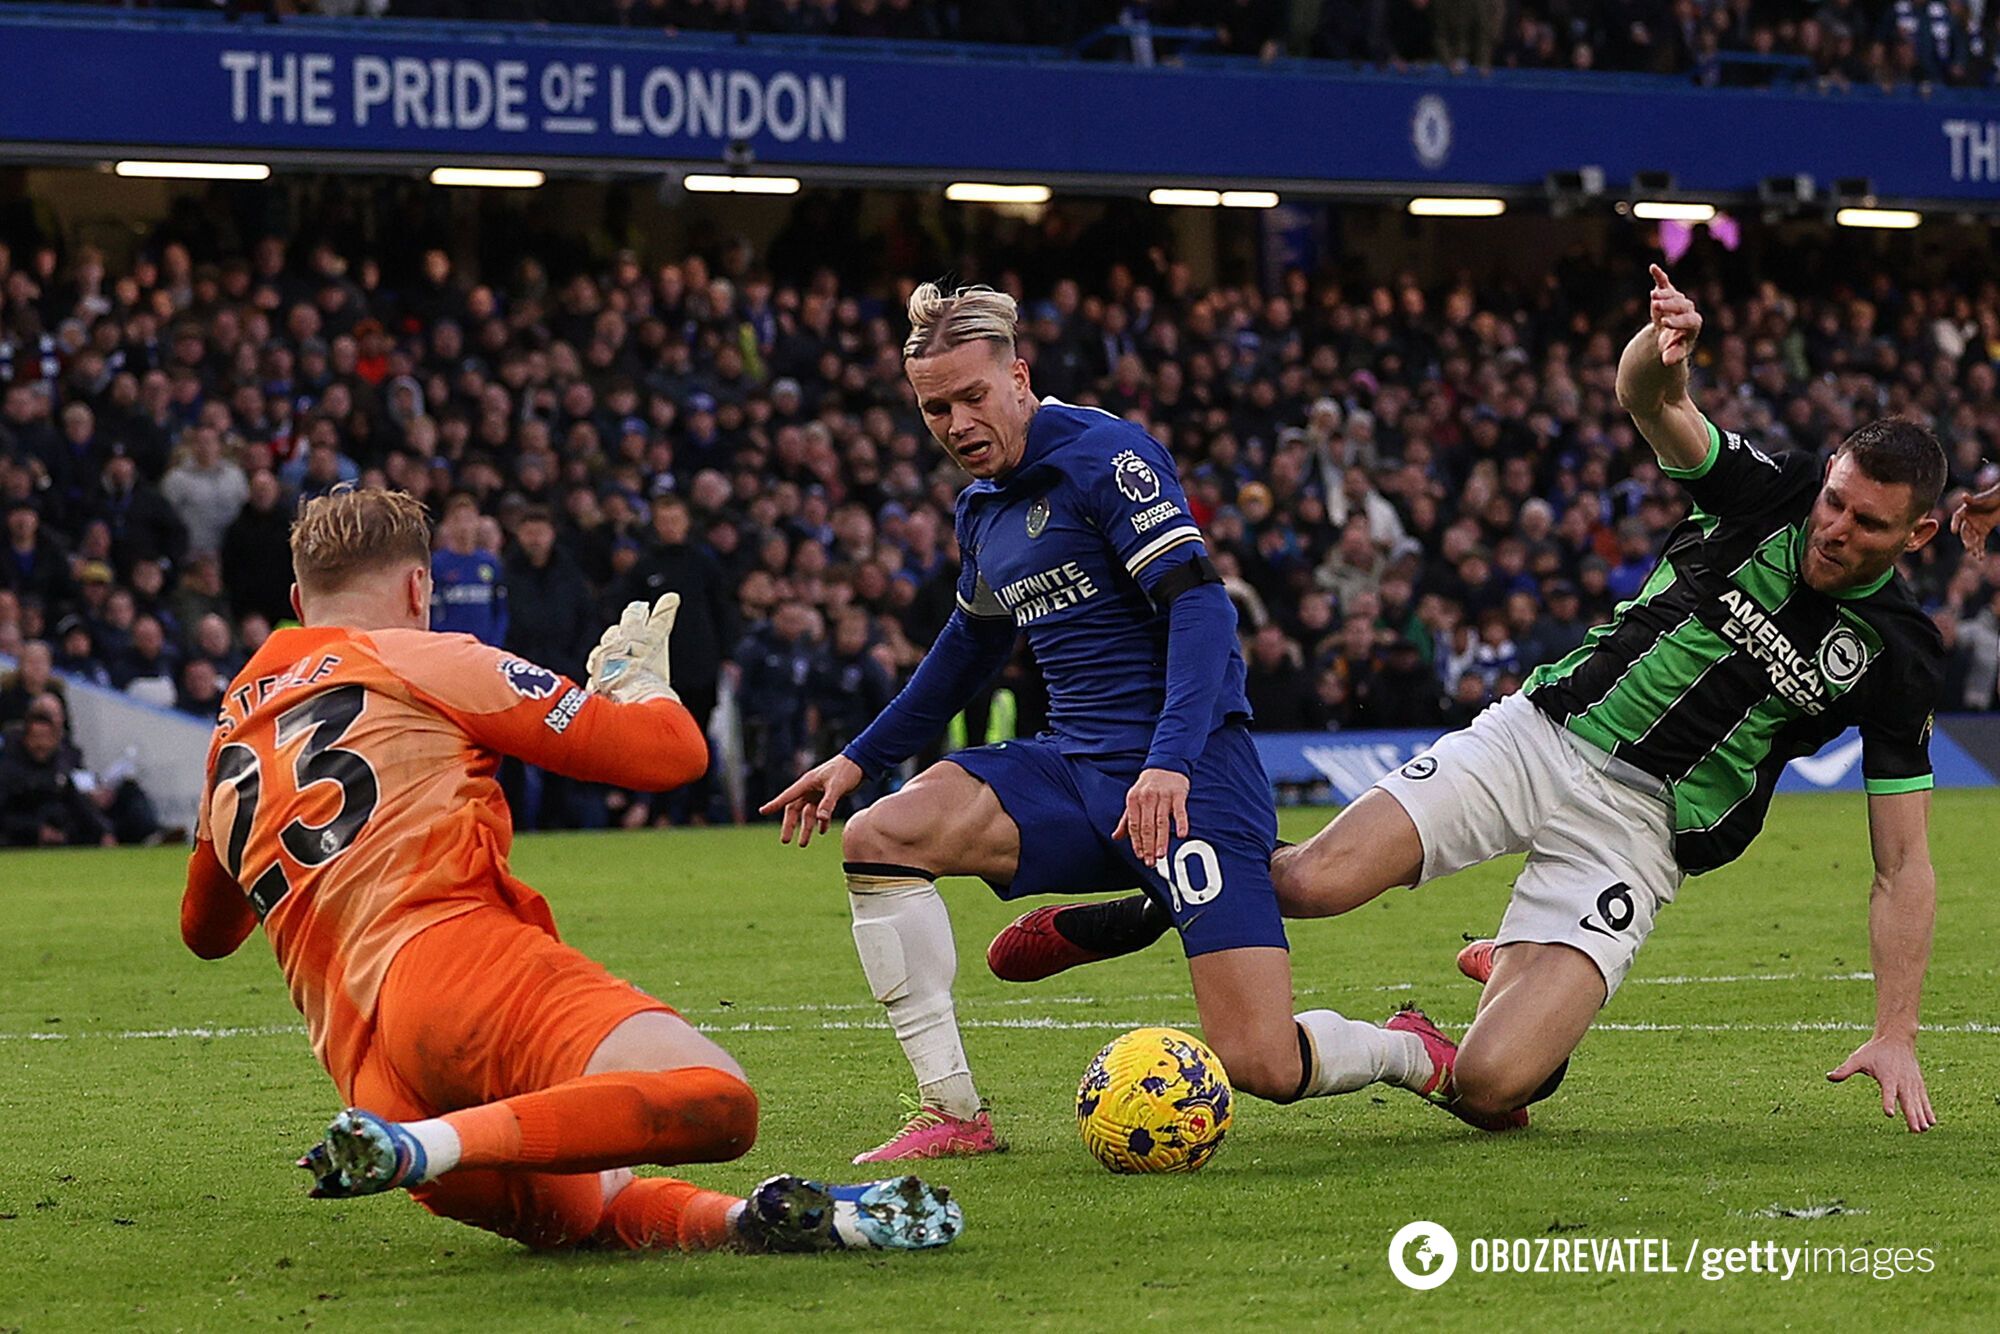 Mudryk came into the starting lineup and earned a penalty in Chelsea's match-winning performance